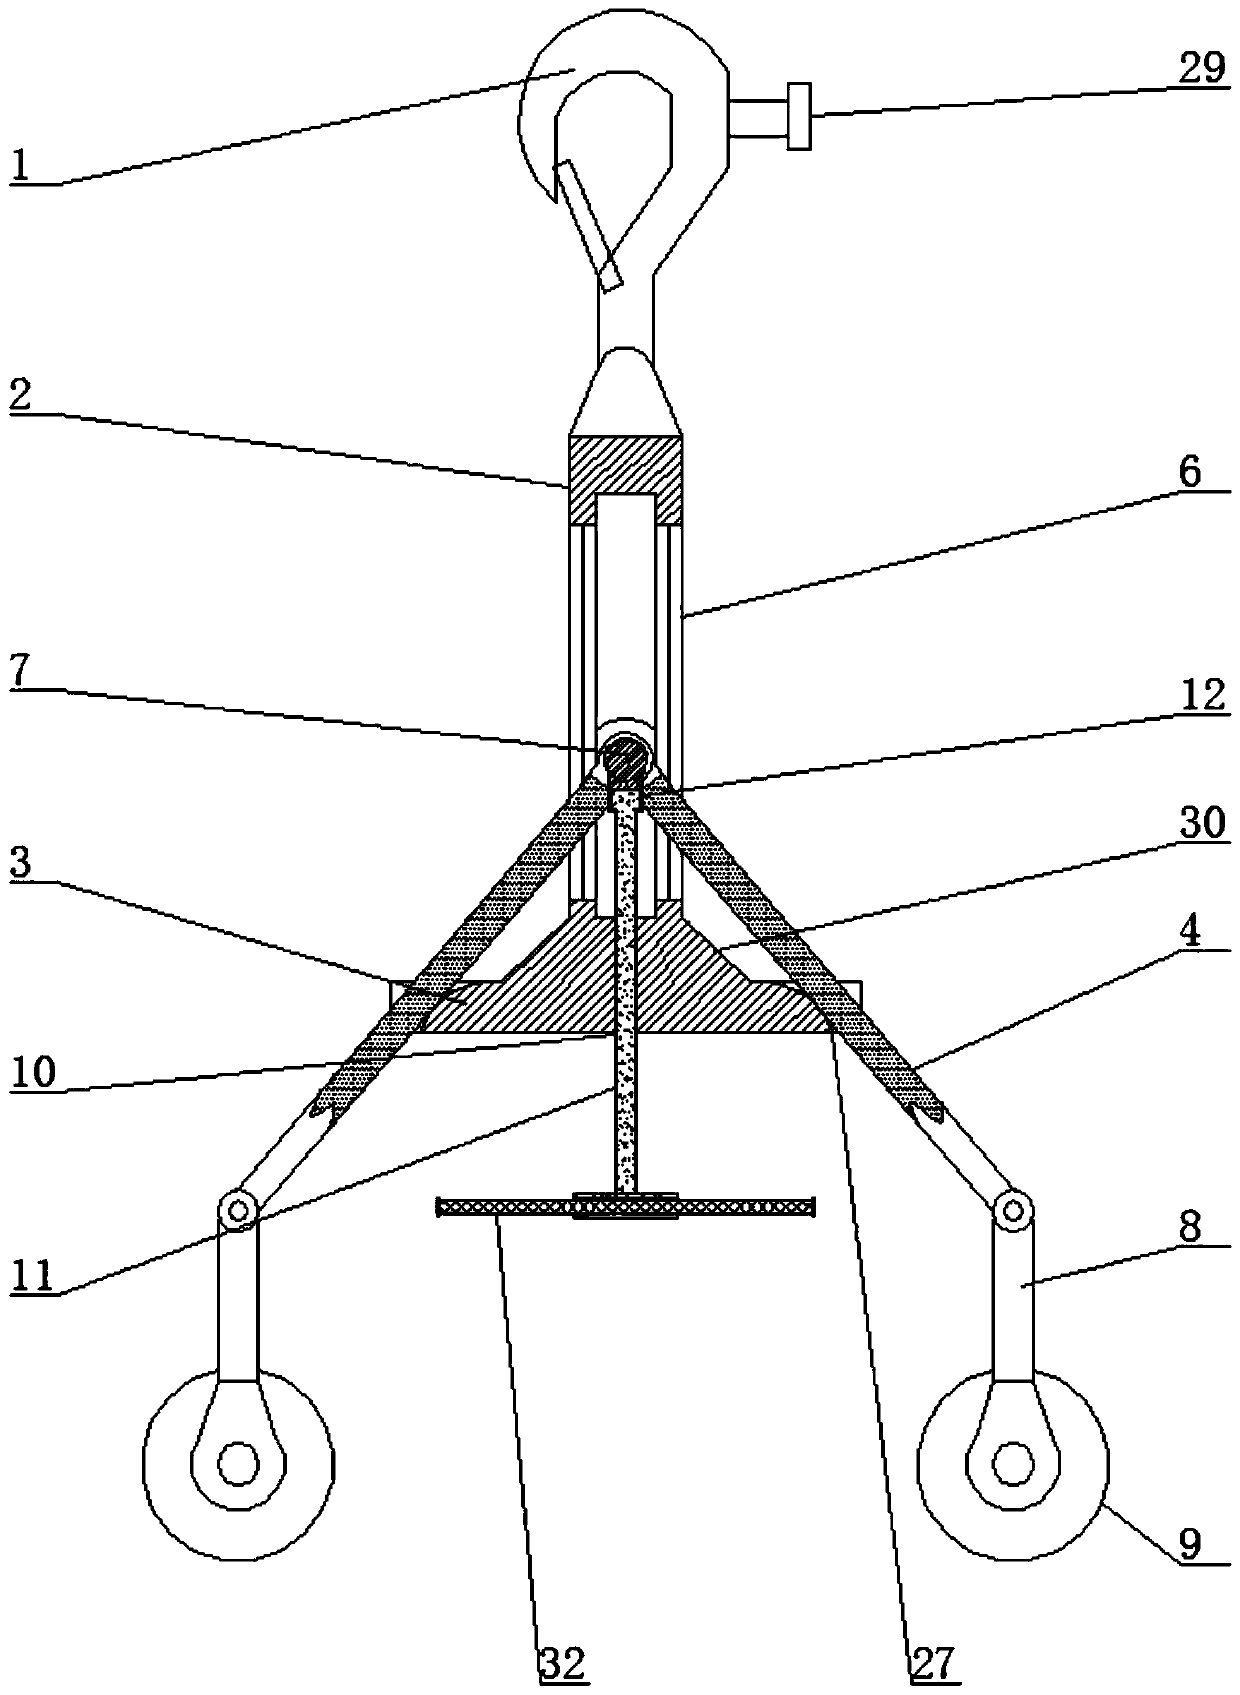 Auxiliary wiring equipment for electric aerial work